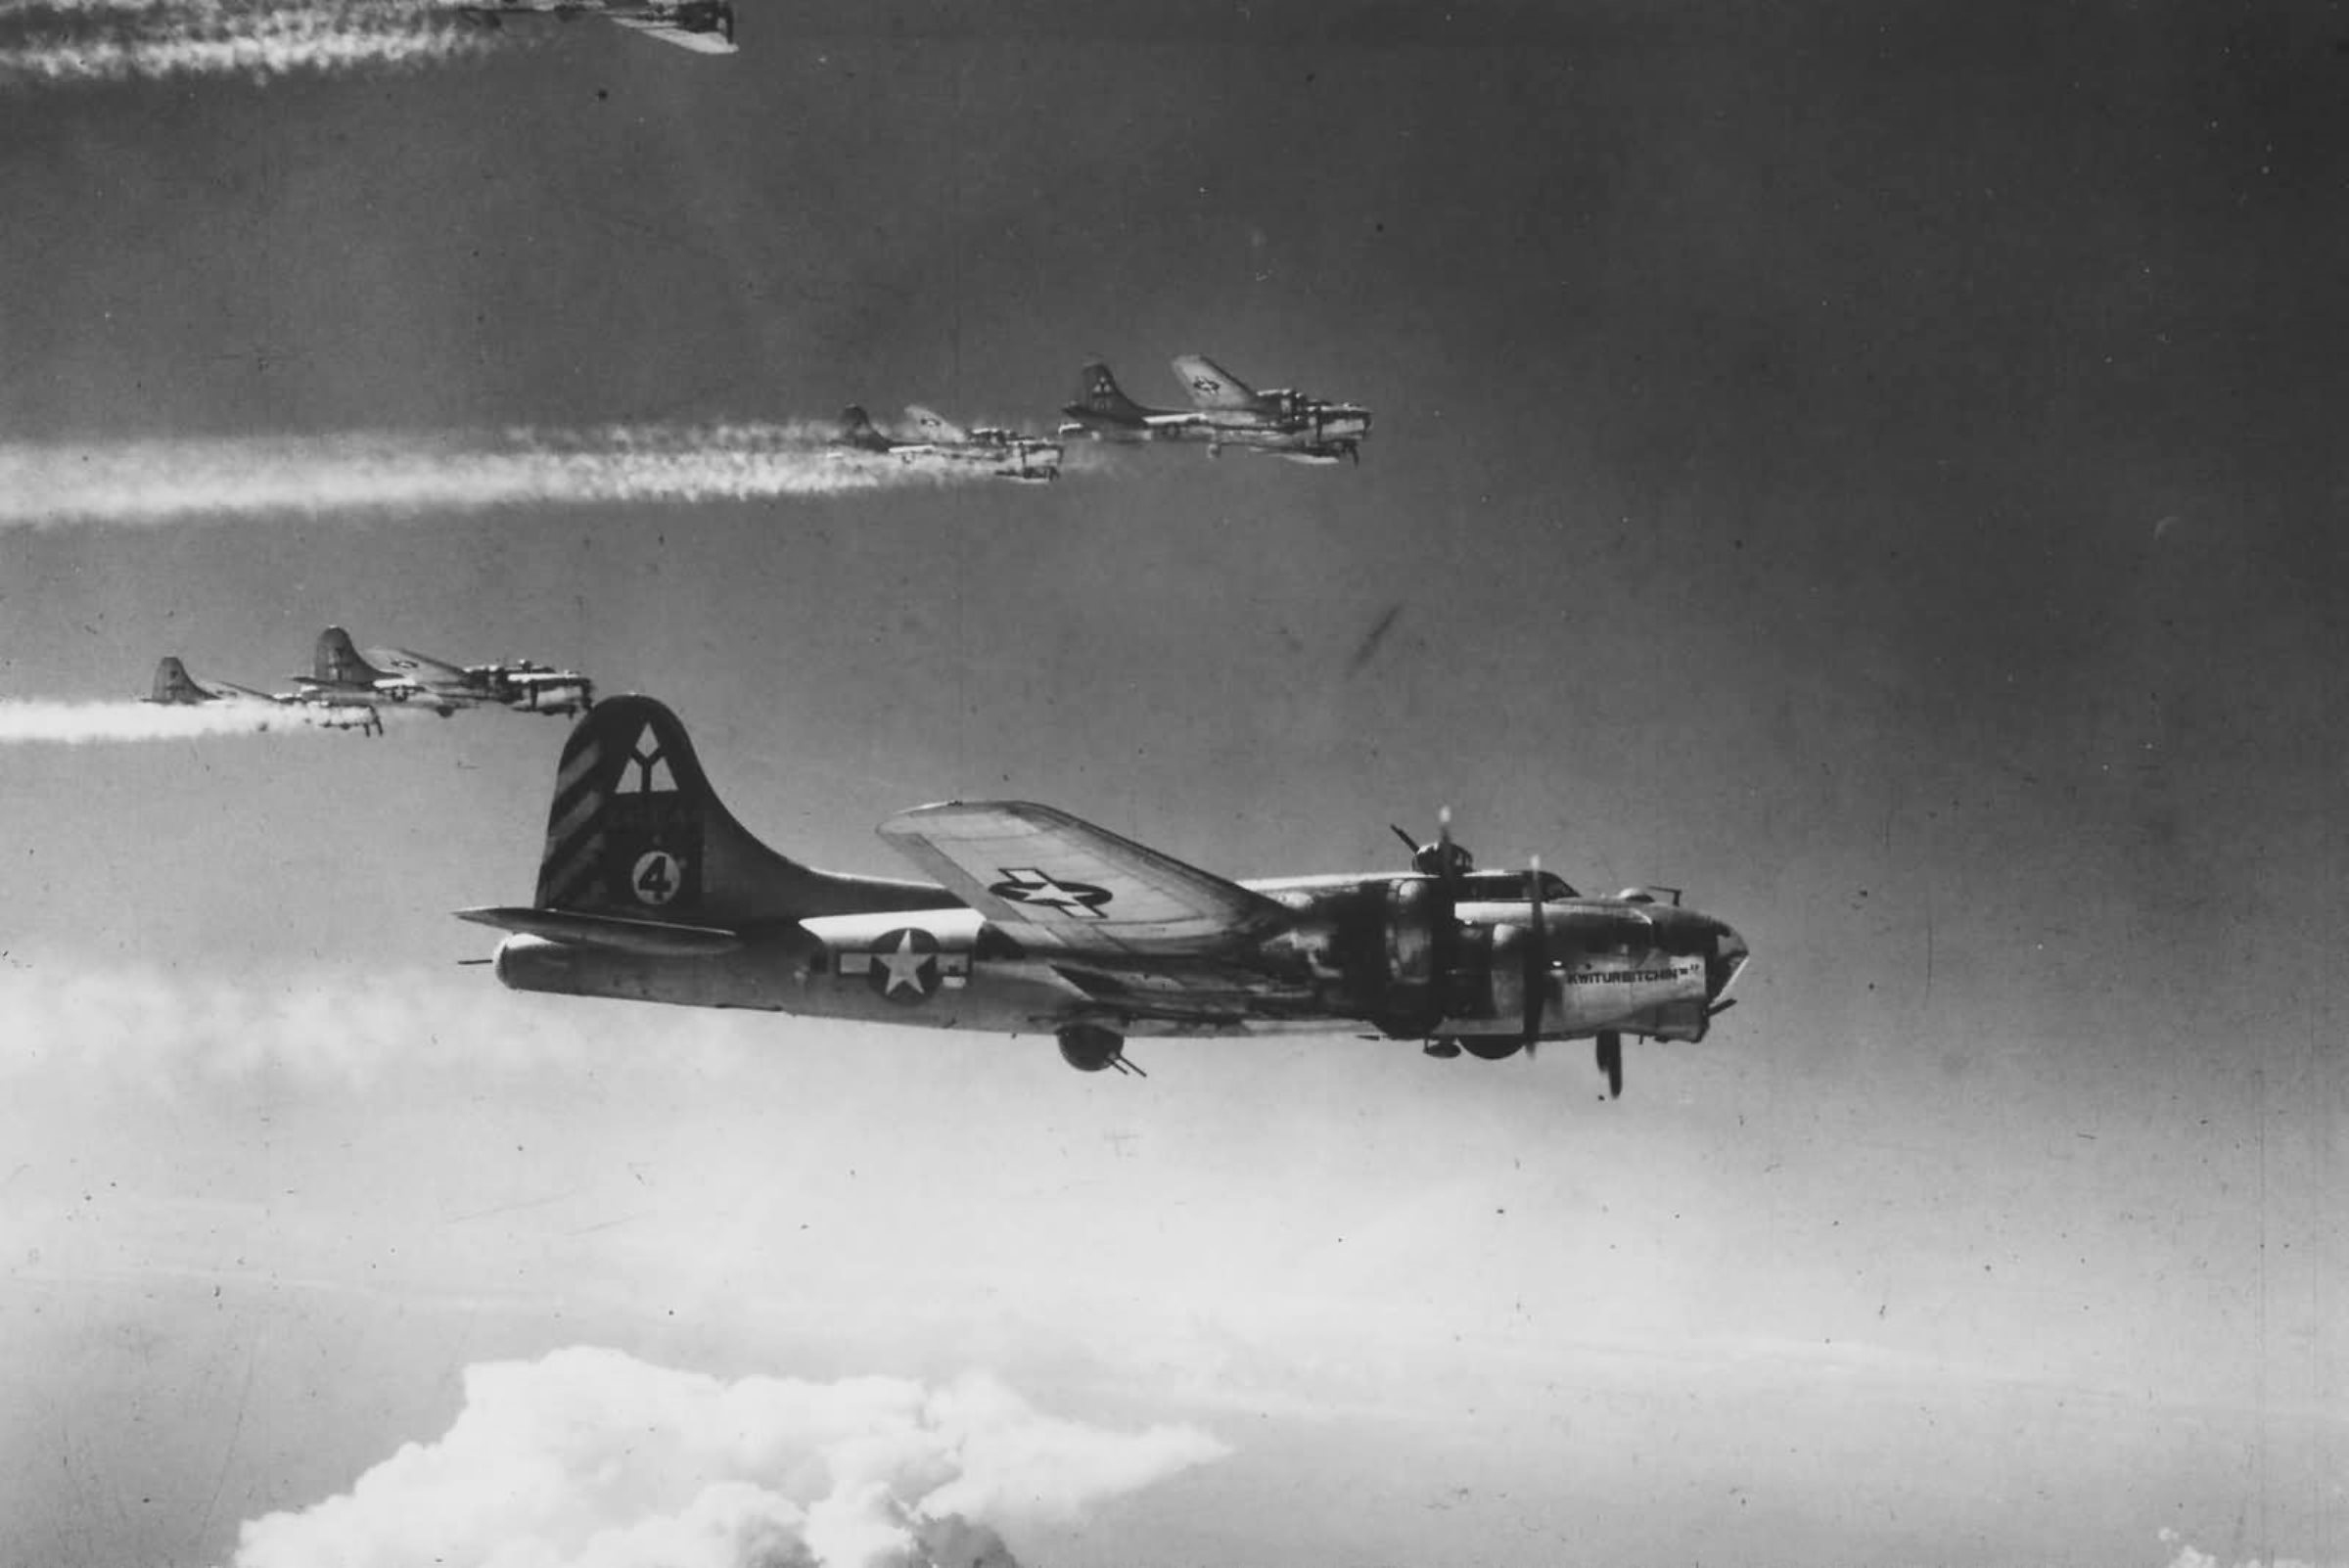 B-17 Flying Fortresses assigned to the 97th Bombardment Group fly into formation during World War II. (Photo courtesy of Airman Air Museum)